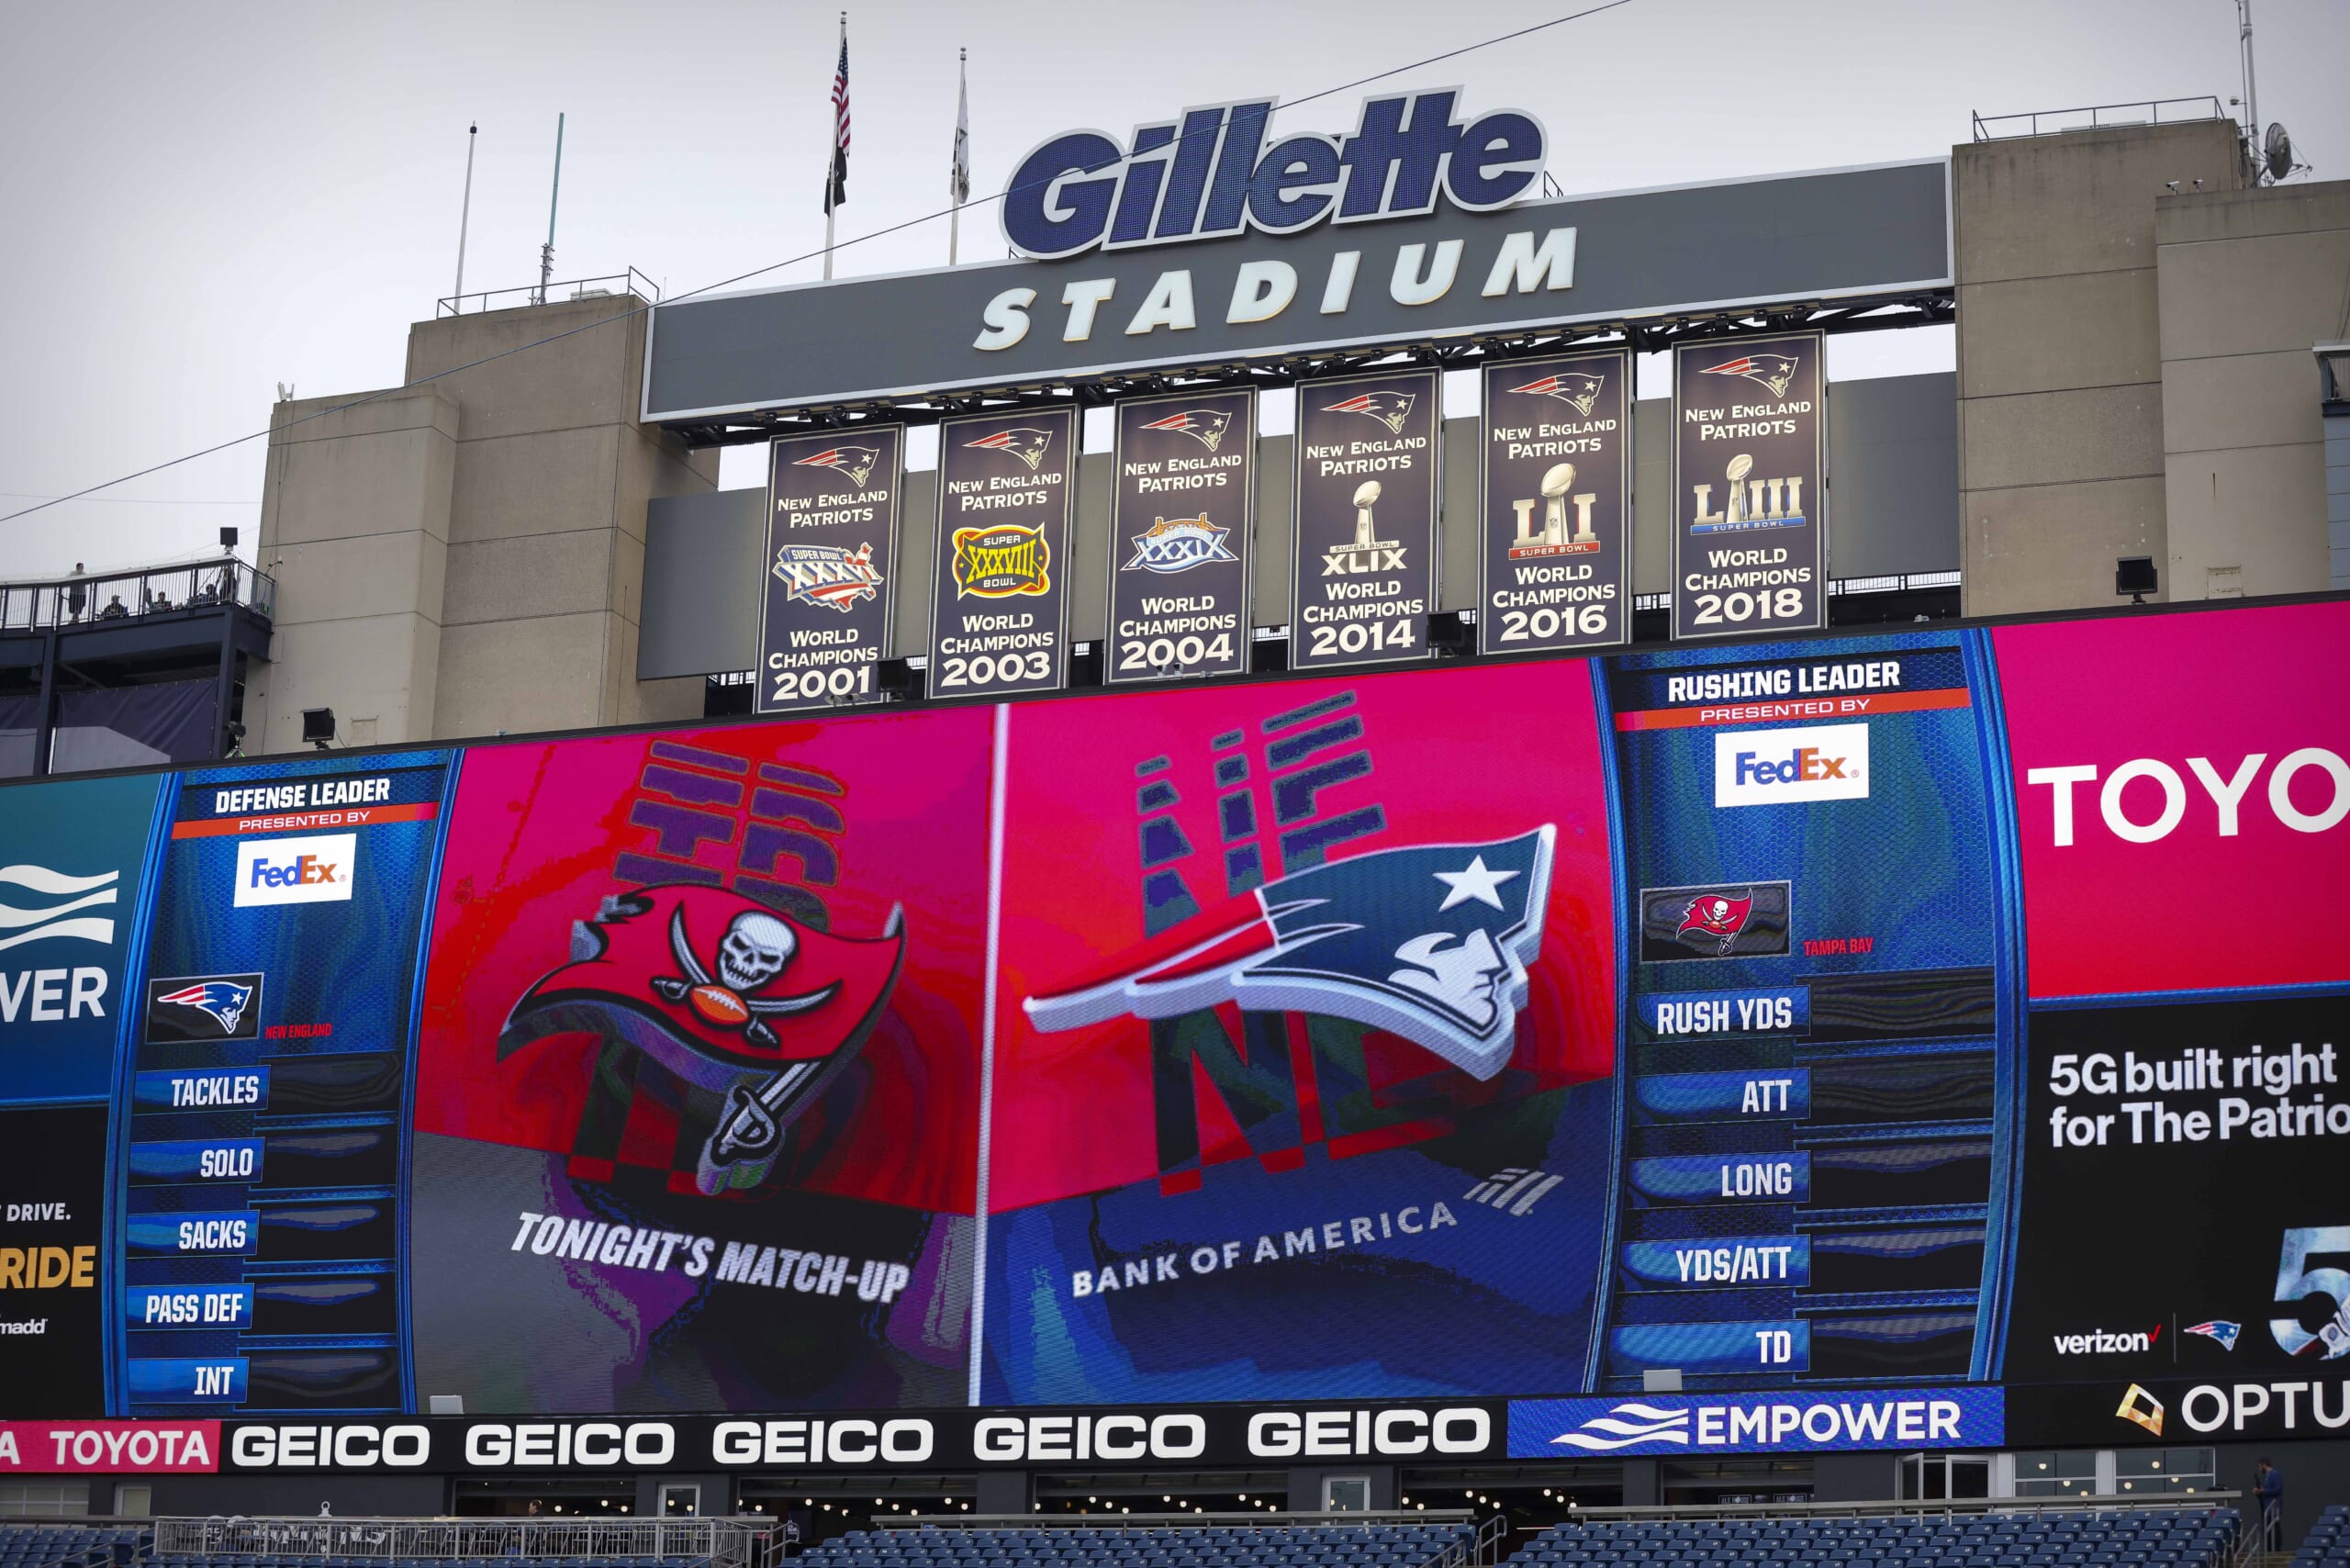 New England Patriots ticket prices reportedly won't increase in 2022